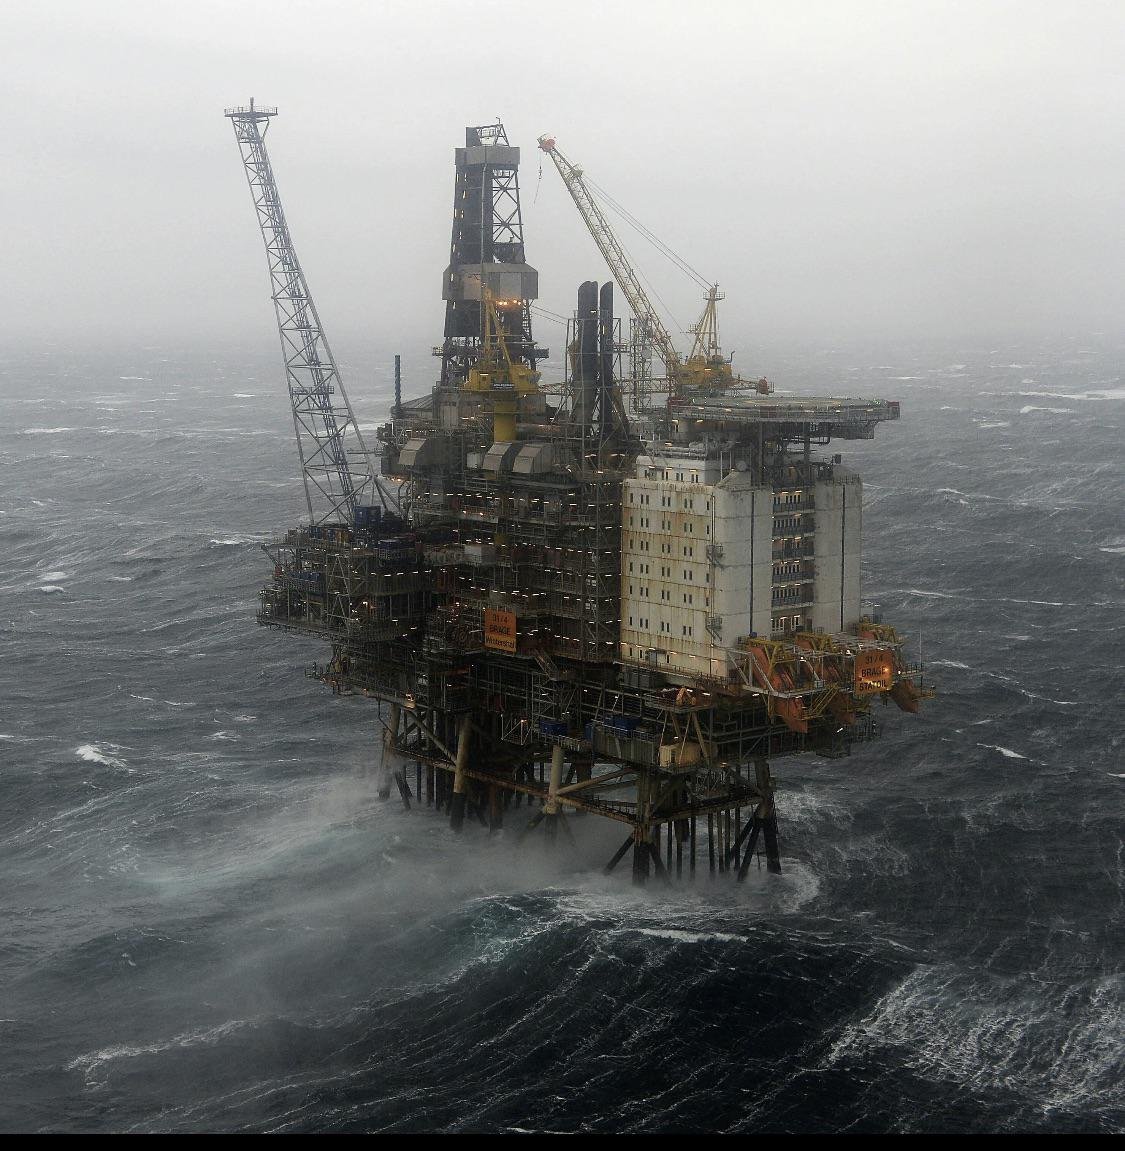 The unintentional dystopian beauty of oil rigs

1. Brage oil field,  located in the North Sea 120 km northwest of the city of Bergen